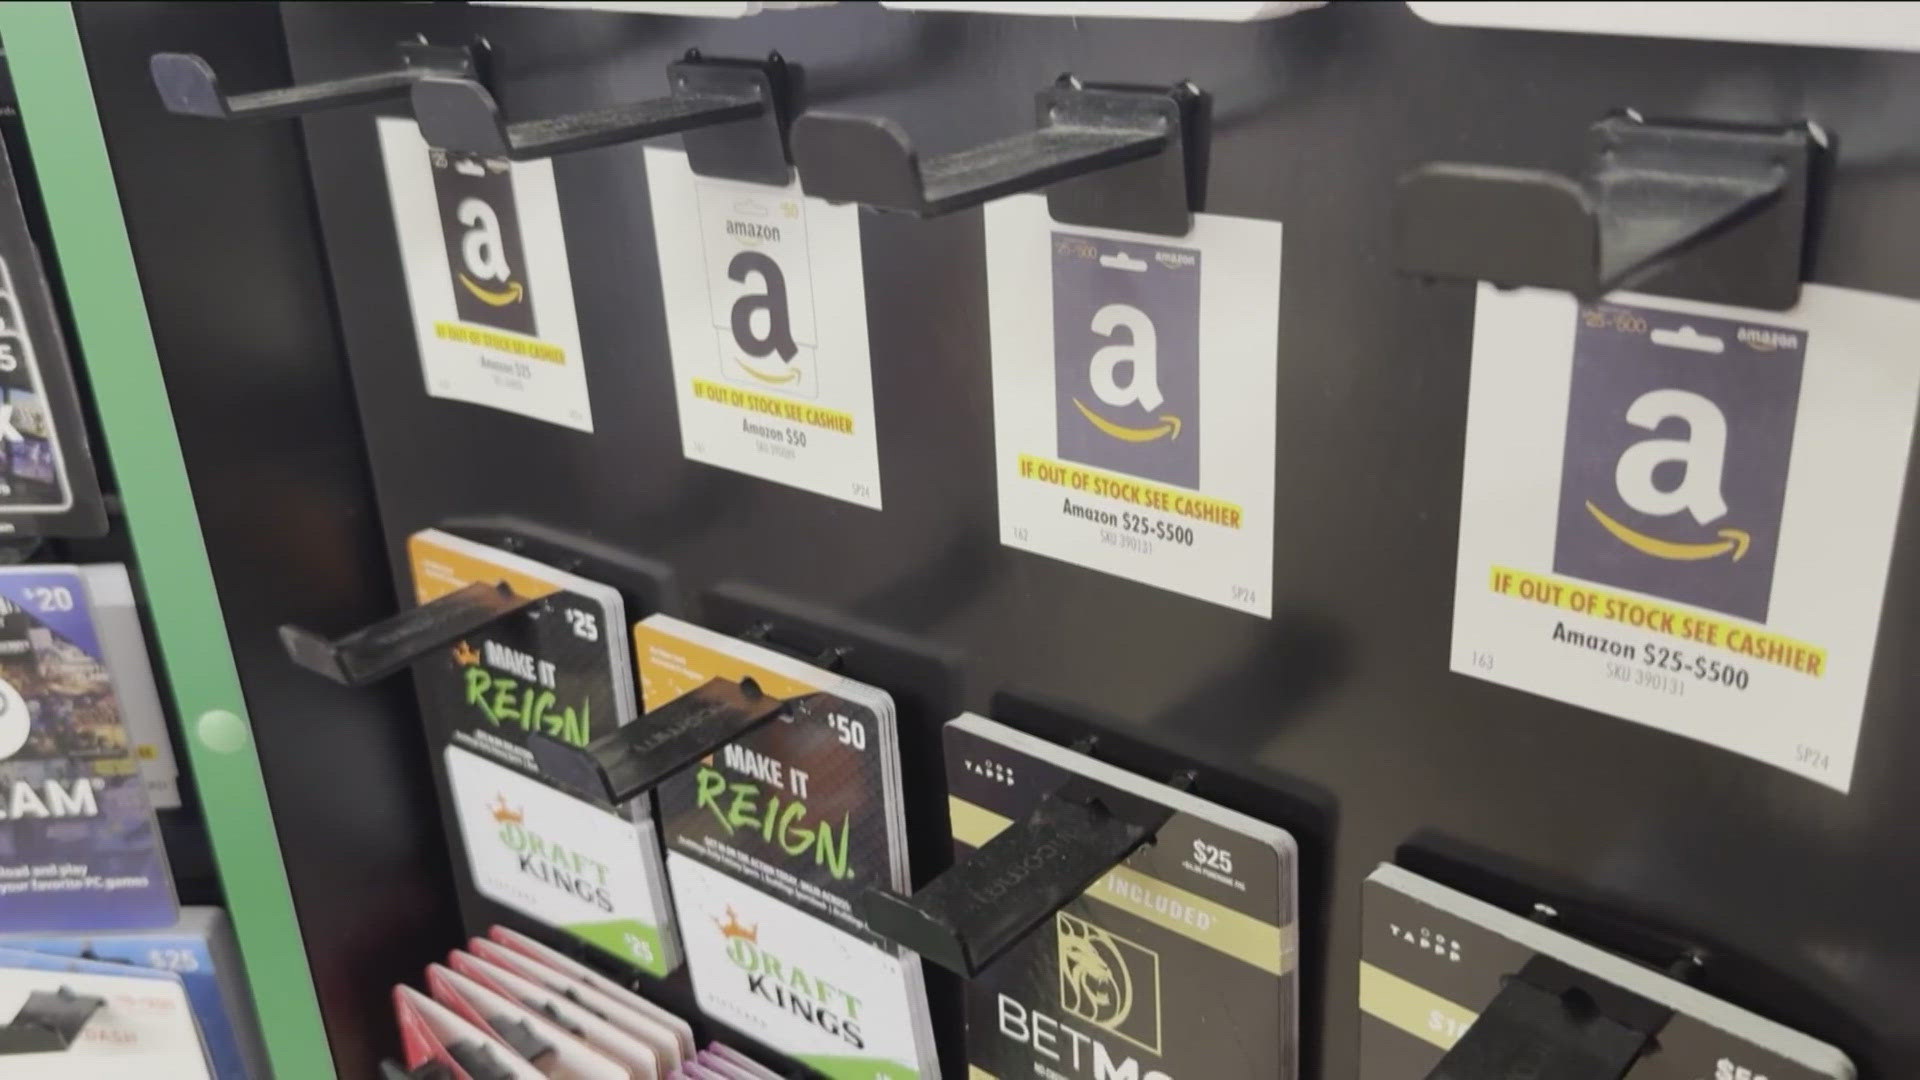 Amazon wouldn't confirm they've pulled the cards, but said they "experiment with ways customers can purchase gift cards."